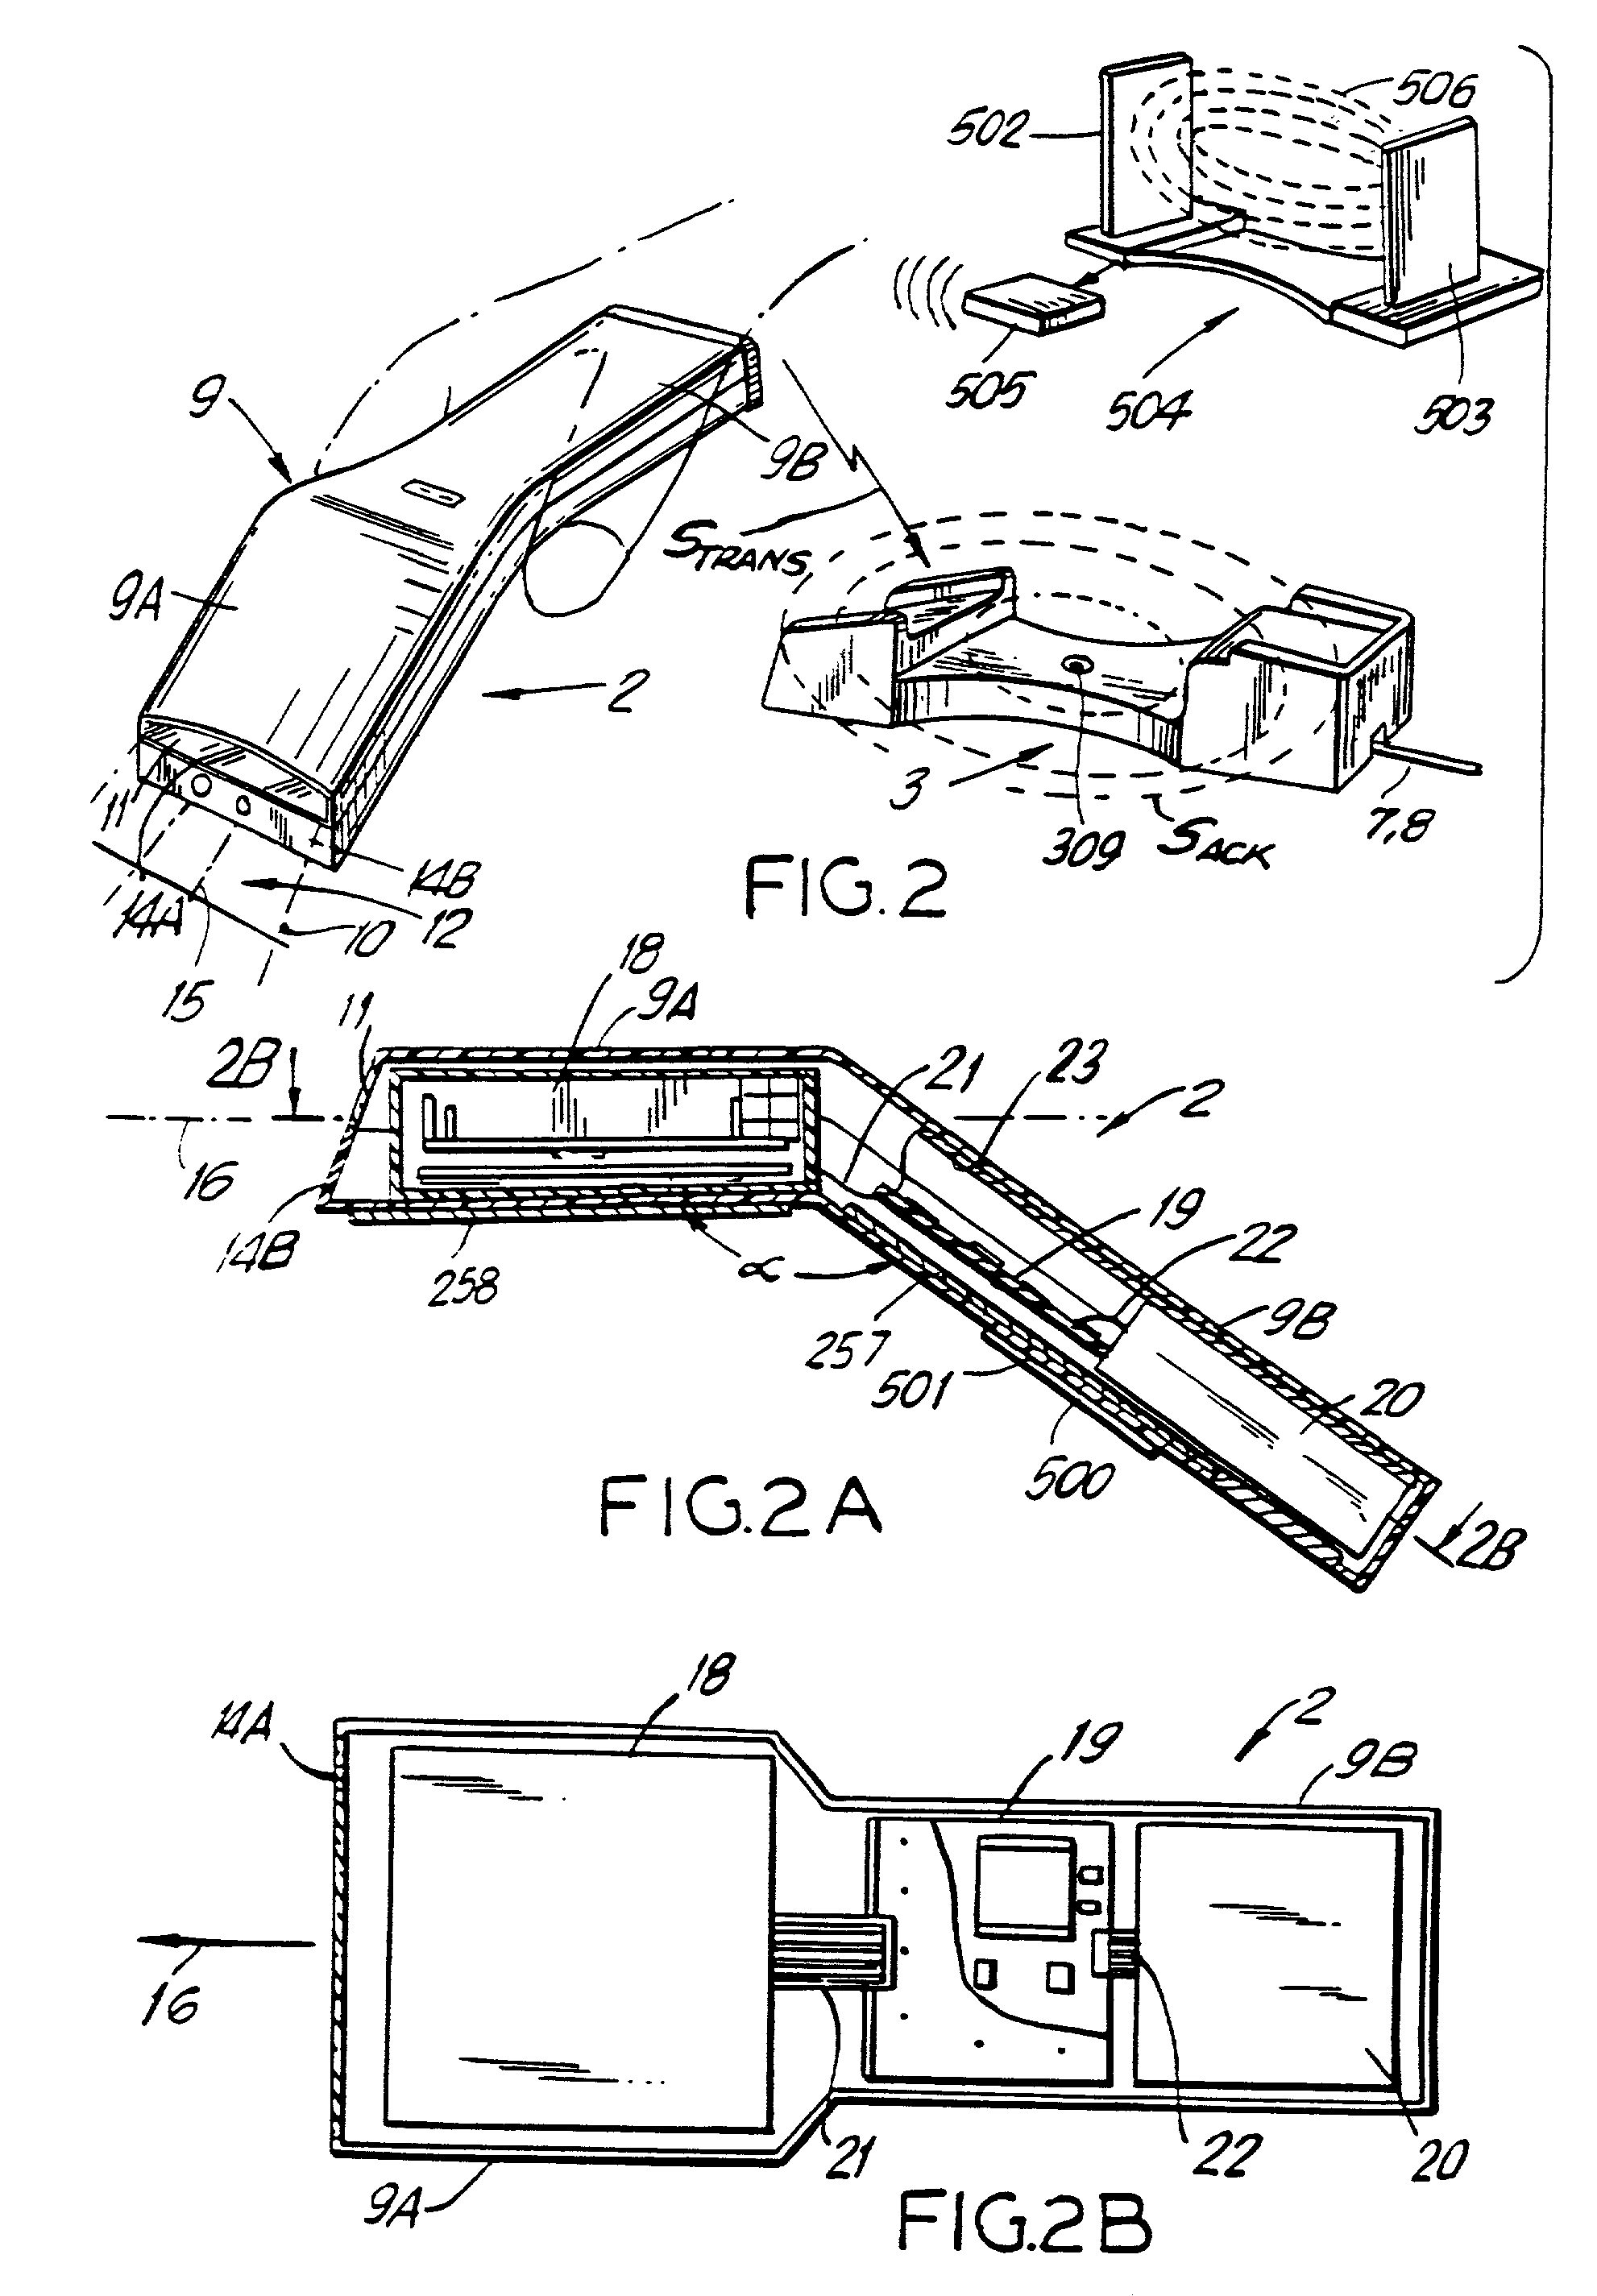 Bar code scanning system with wireless communication links